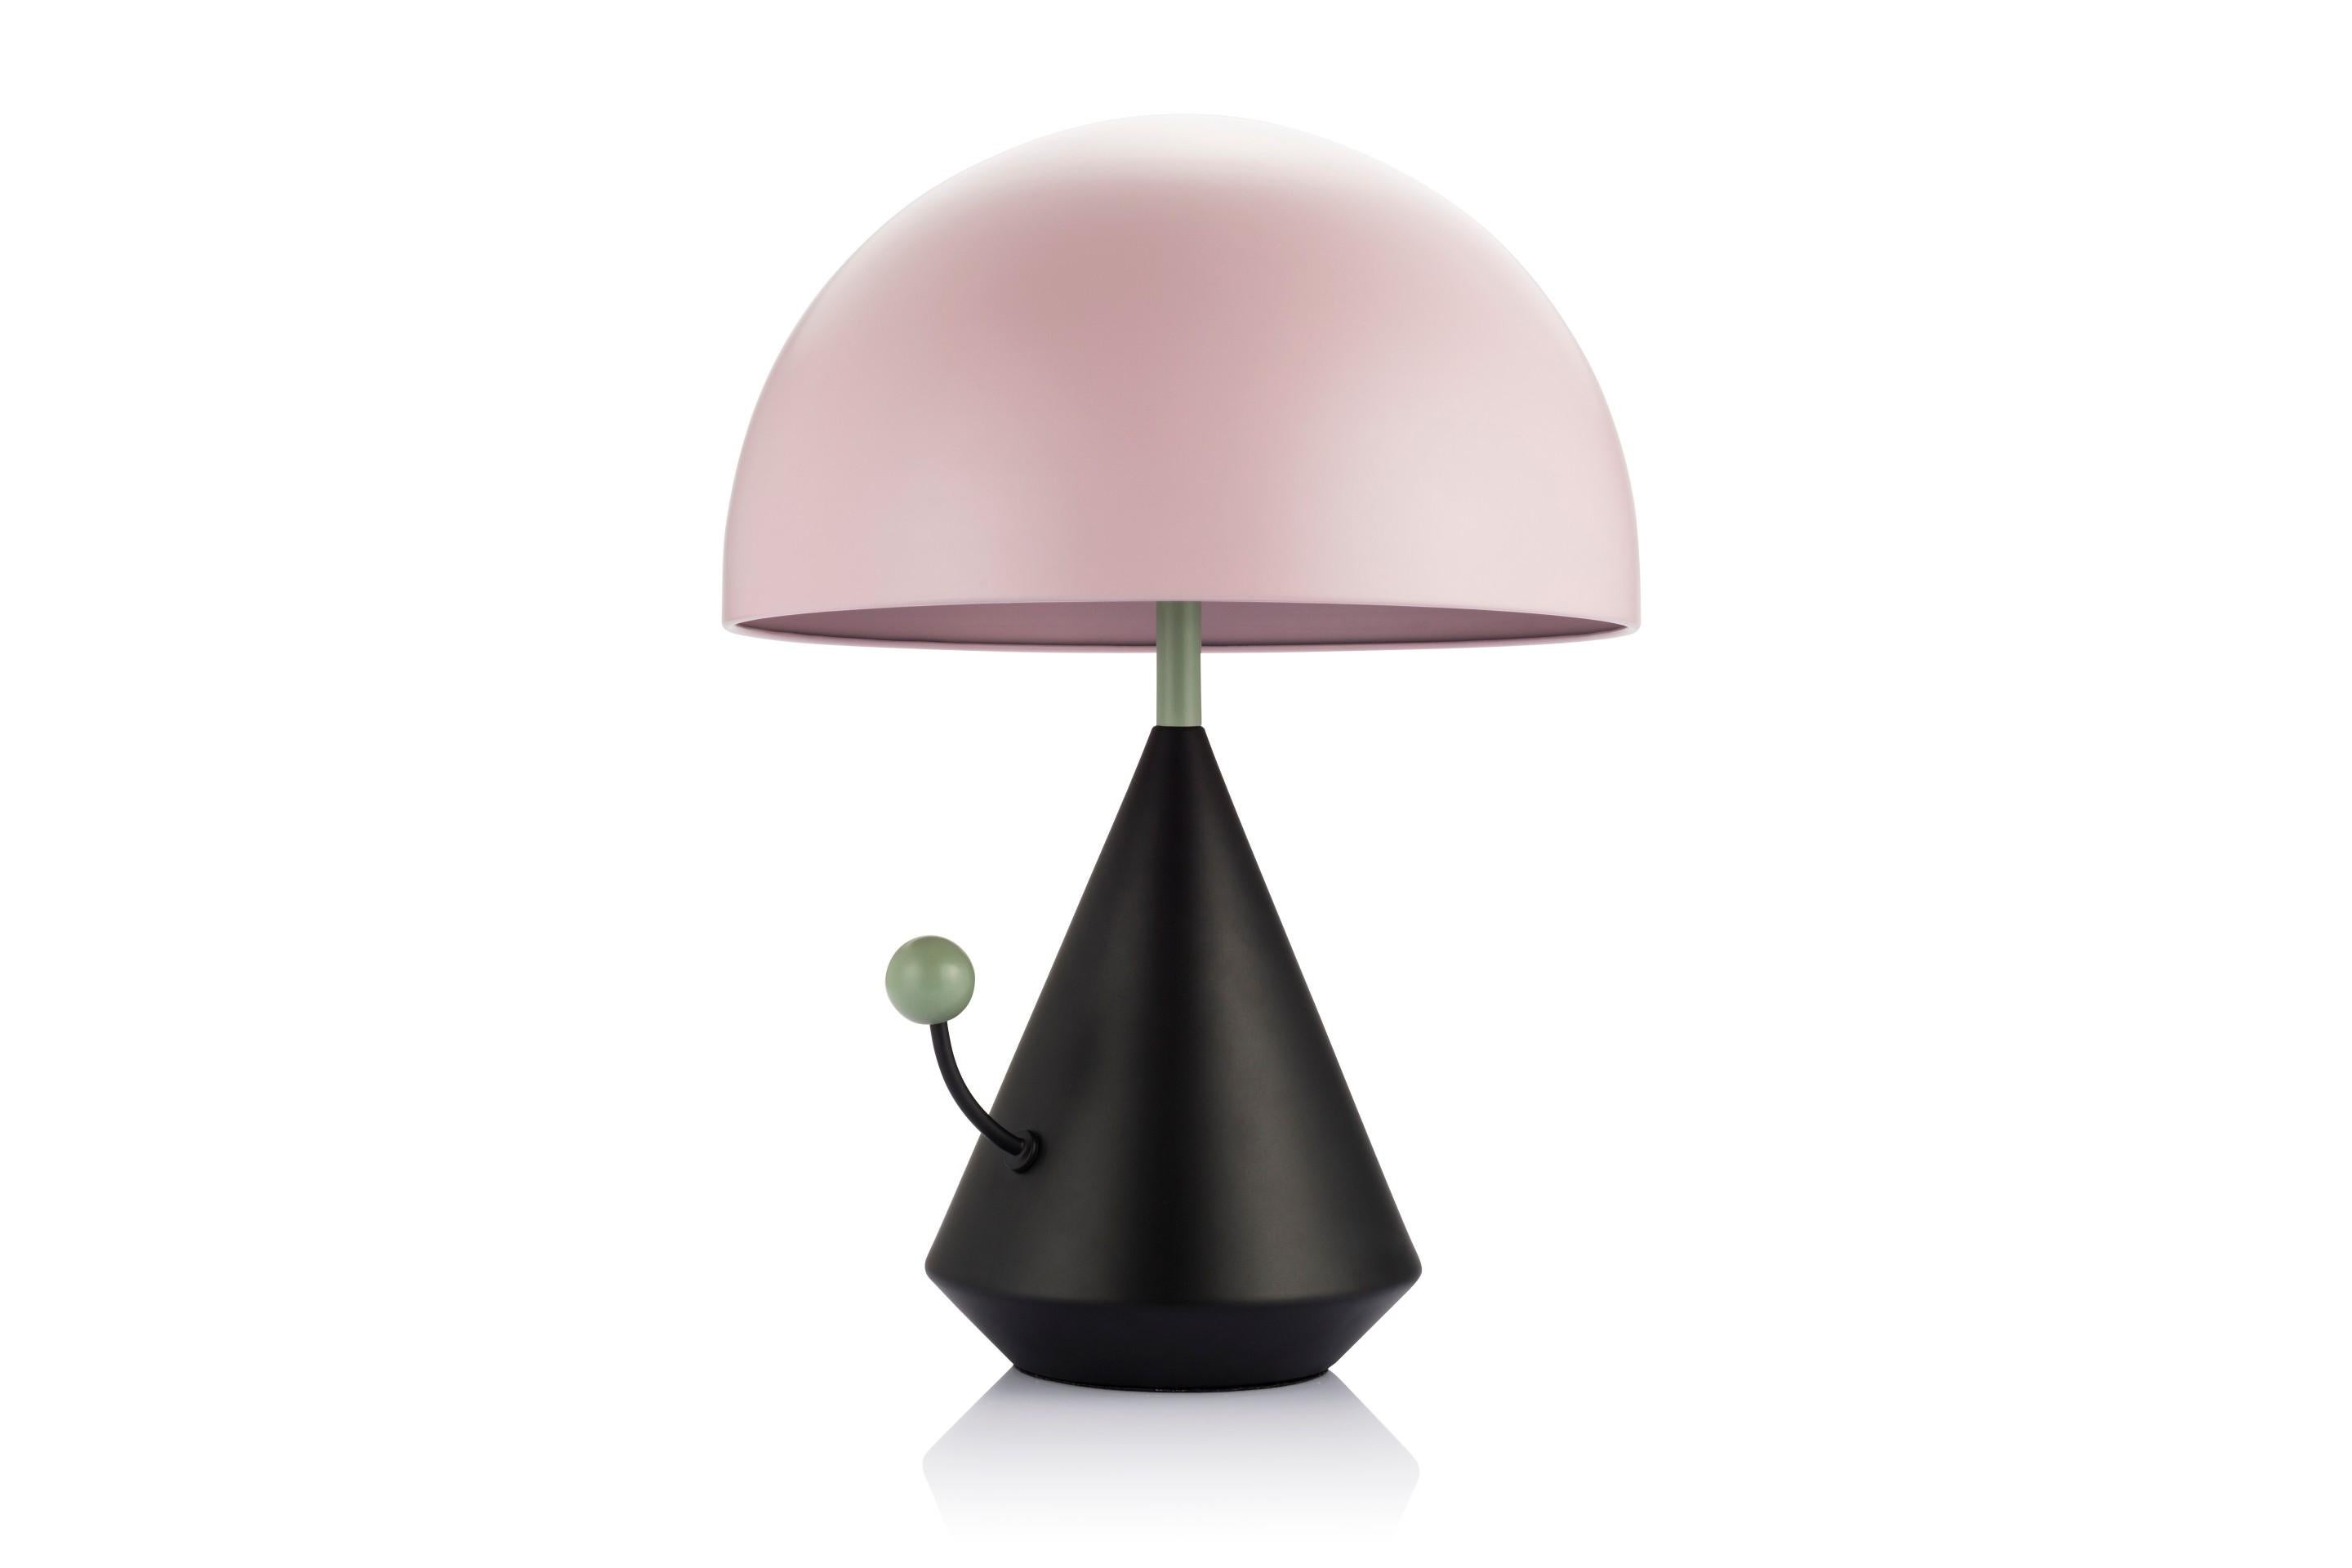 Dali Surrealistic table lamp by Thomas Dariel, Maison Dada
Measures: Diameter 31.5 x height 43 cm
Tricolored
Powder coated metal shade, base and framework
Touch switch in color finish
220V – 240V 50Hz E27 max. 60W
Available in 3 color